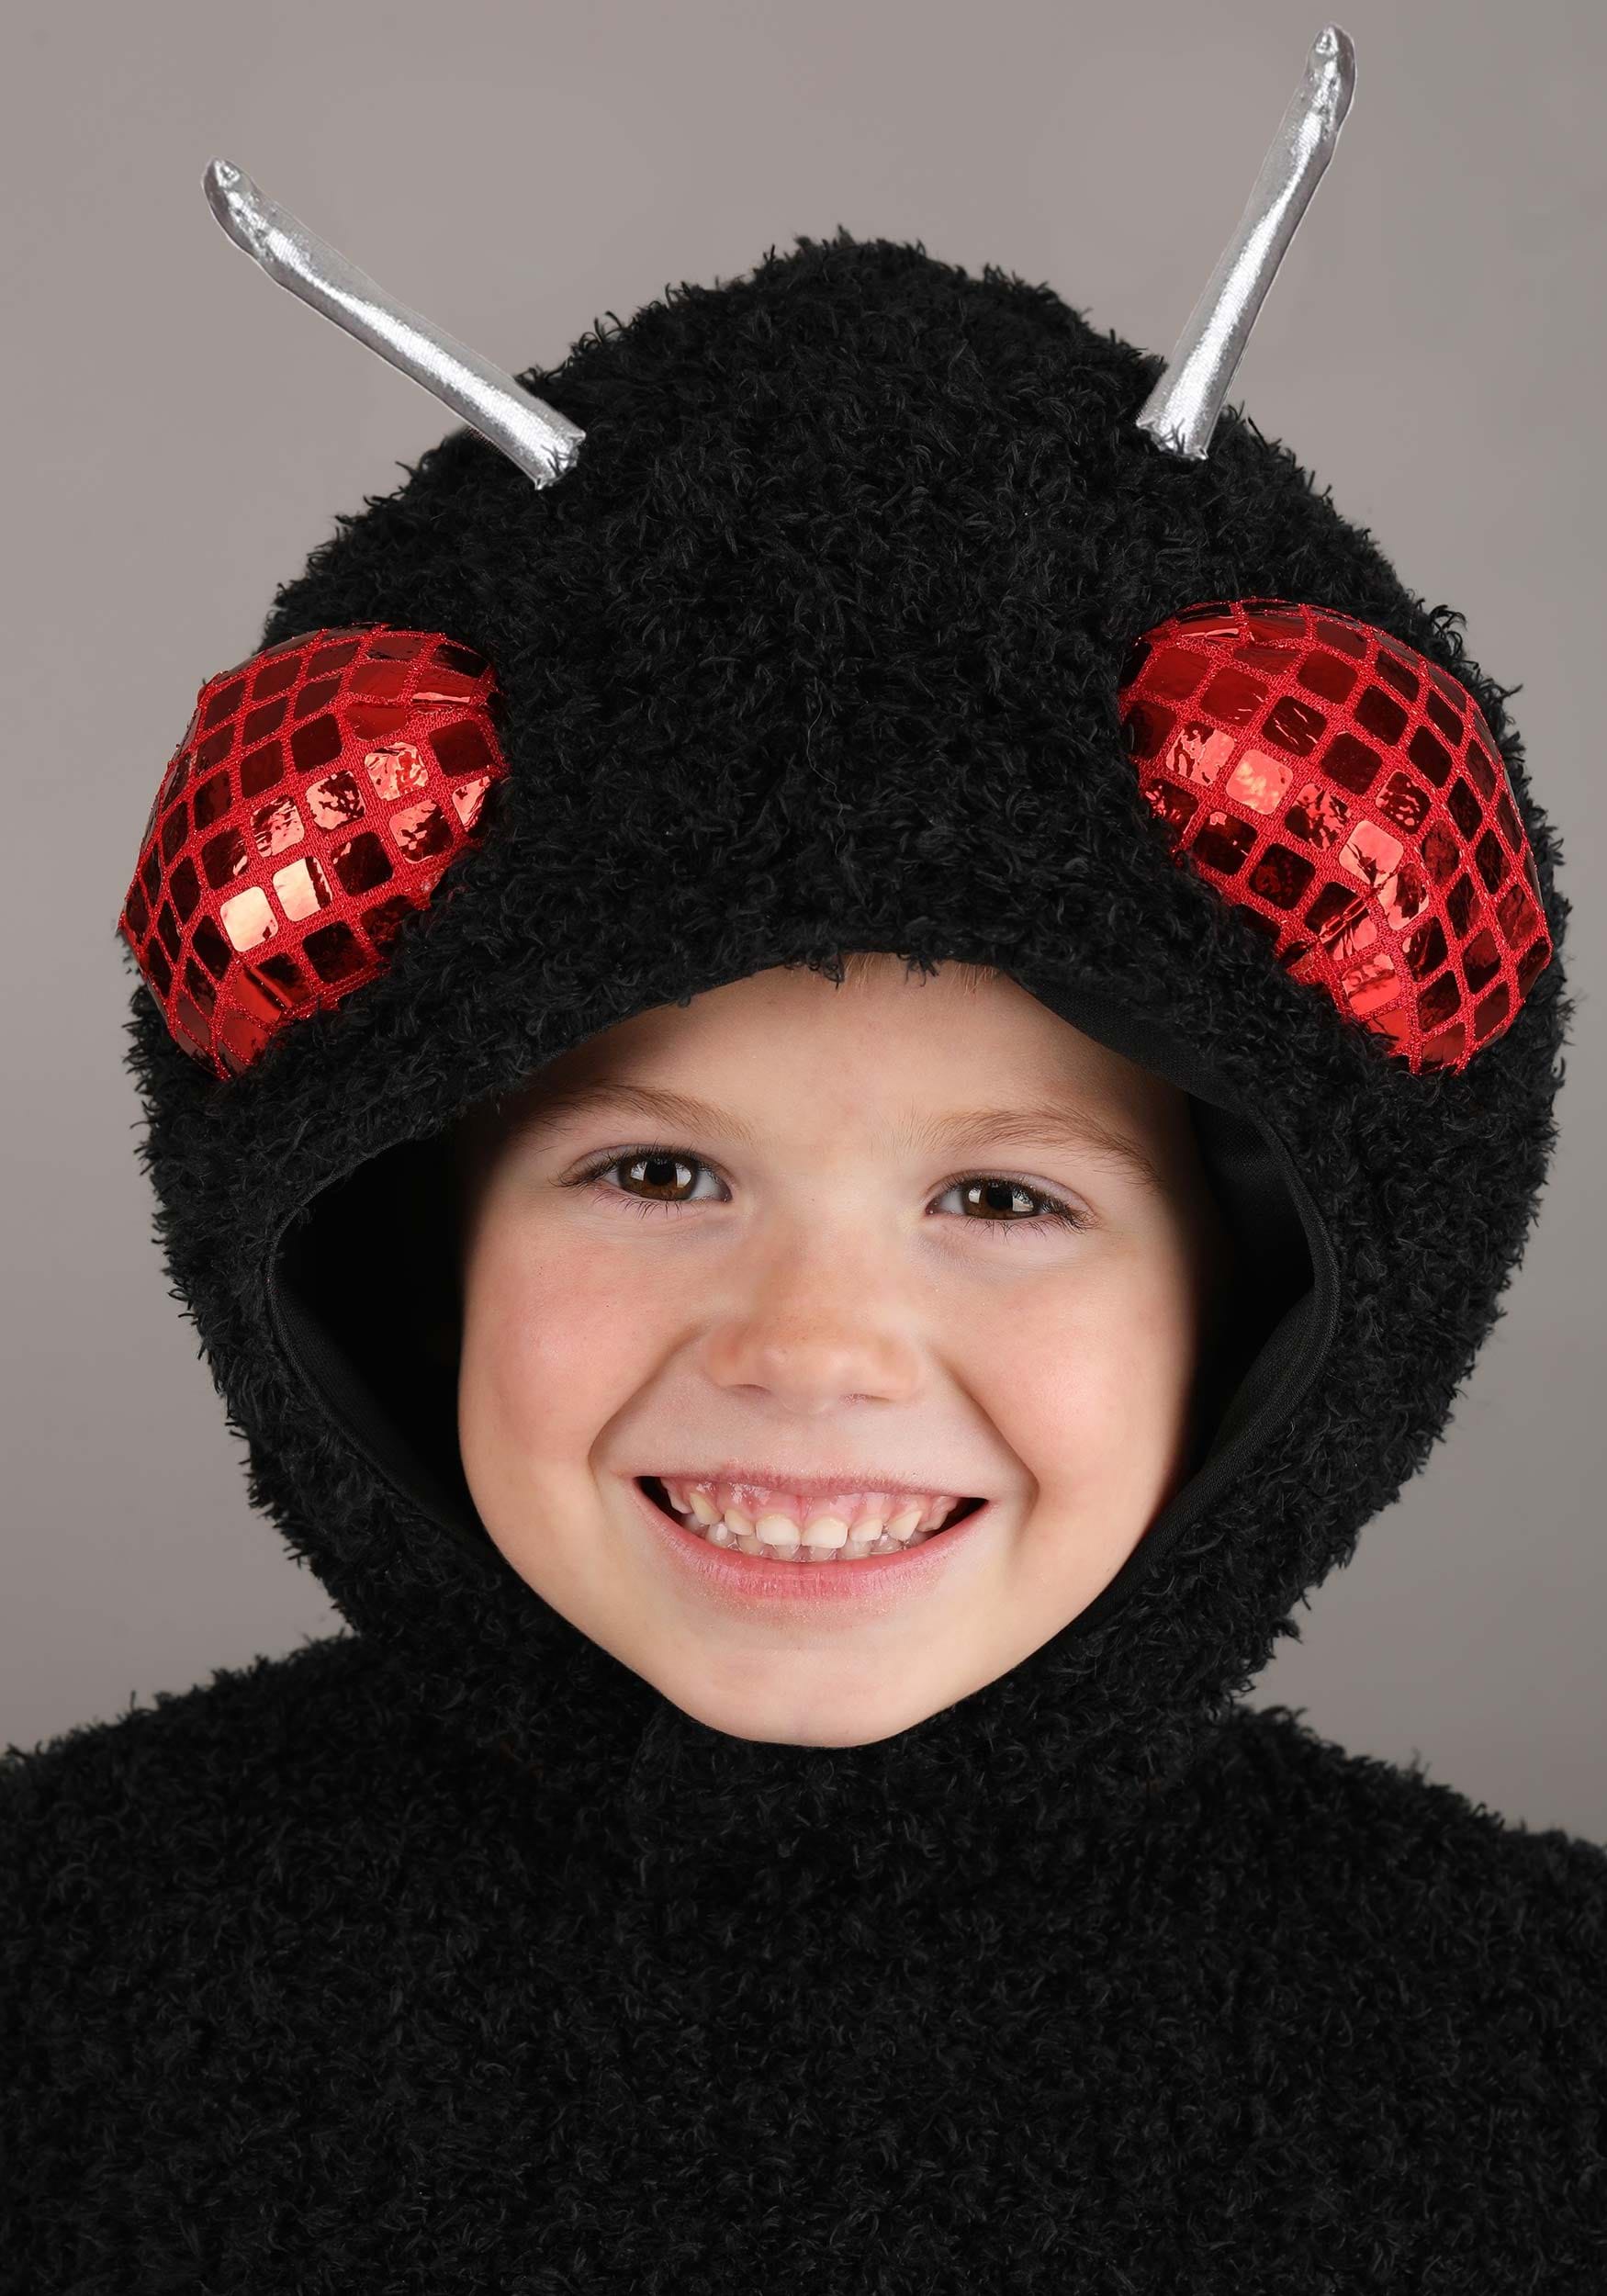 Infant Fuzzy Fly Costume